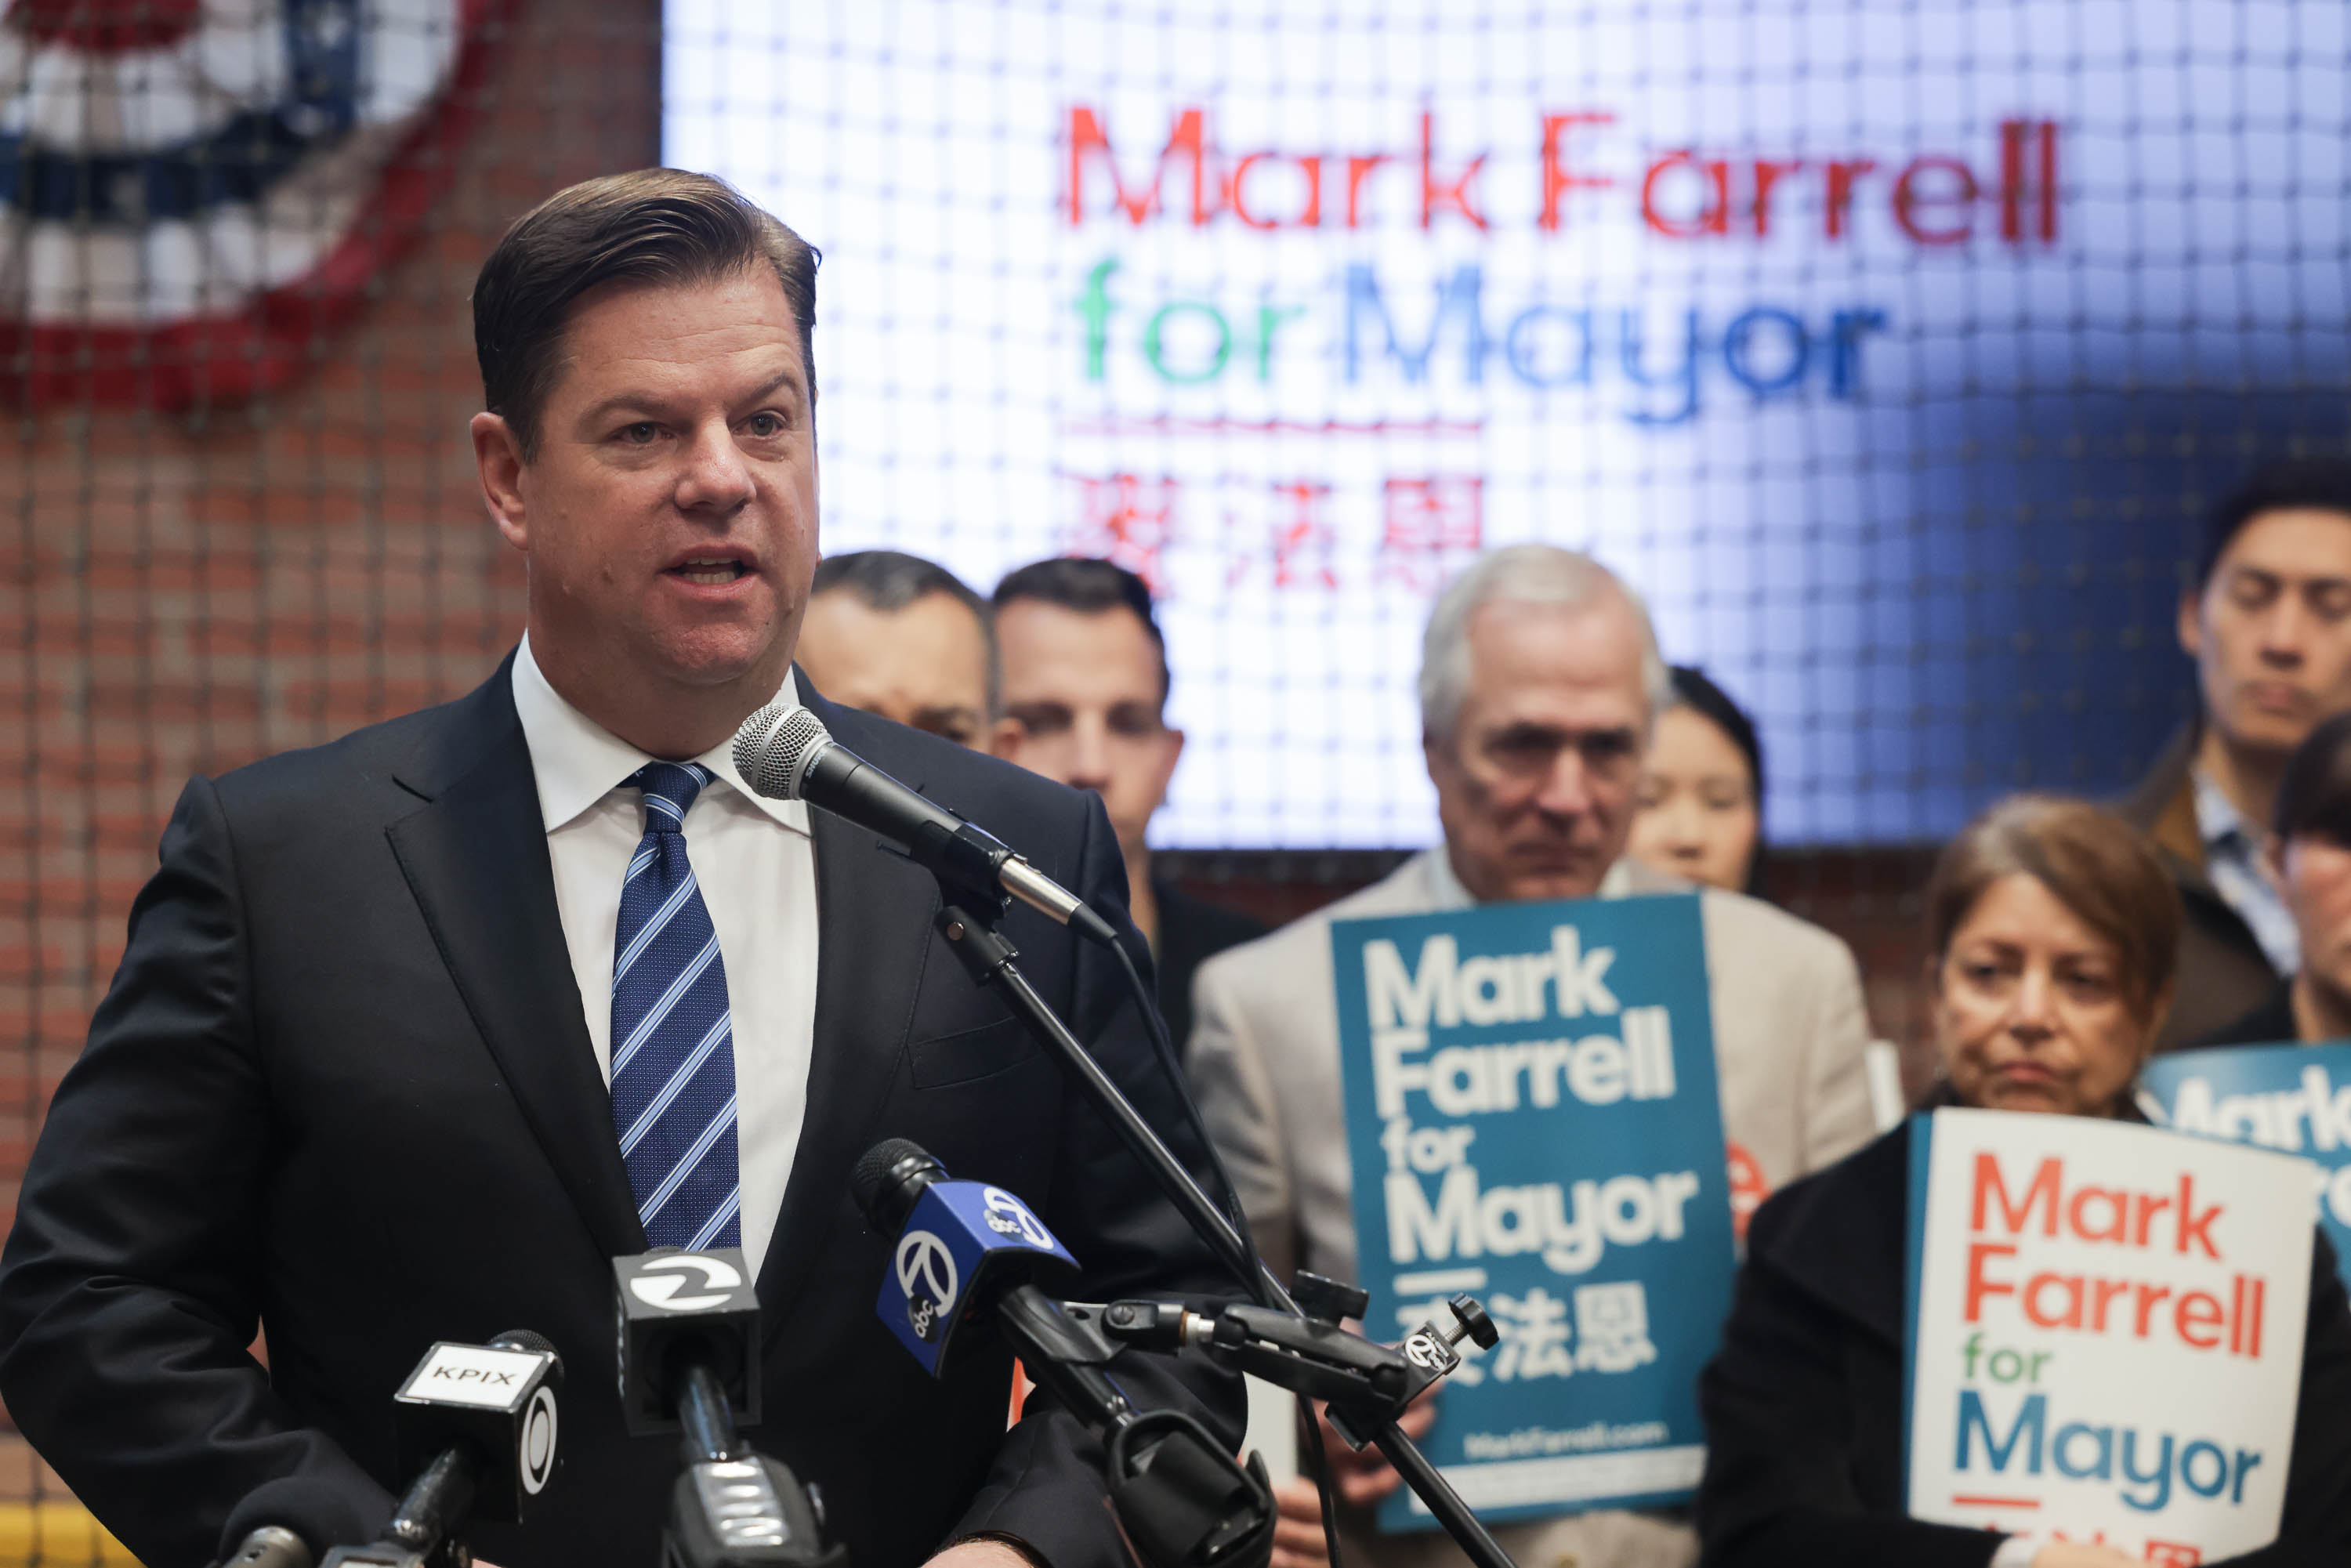 A man speaks in front of microphones as supporters holding campaign signs reading &quot;Mark Farrell for mayor&quot; stand in the background.